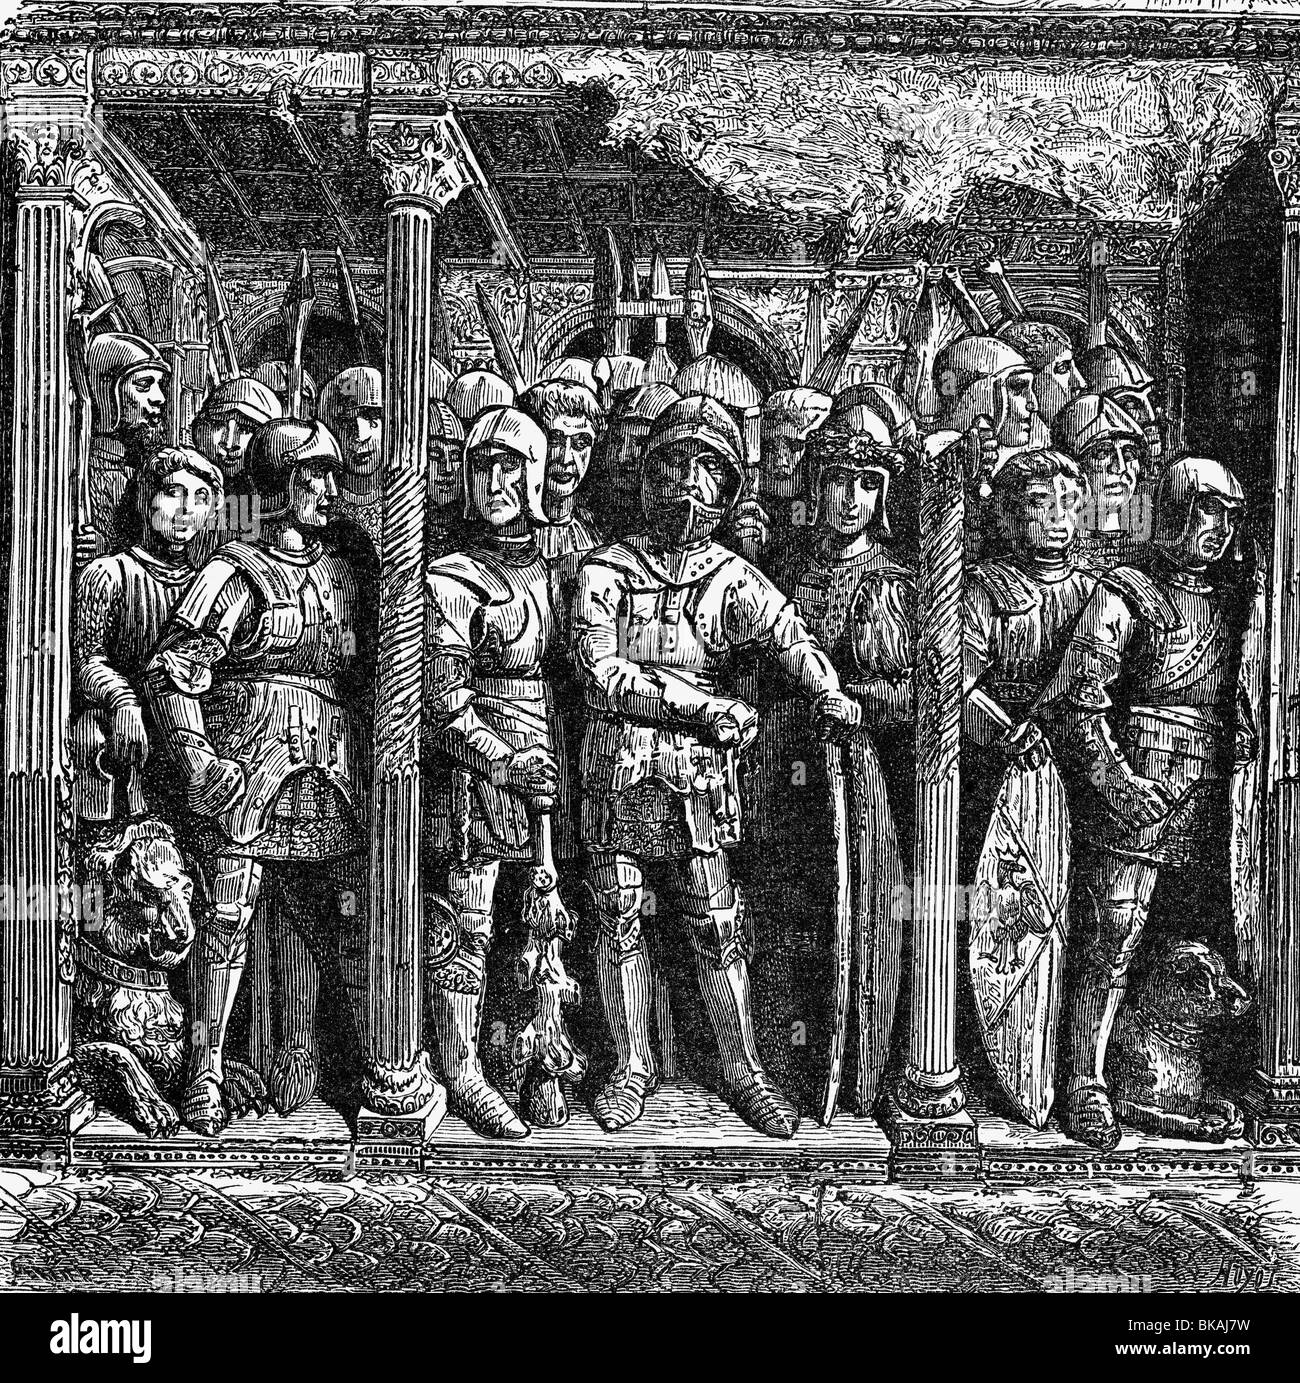 military, knights, Italian warriors of the 15th century, wood engraving after a relief on the Triumphal Arch of Castel Nuovo, Naples, erected in 1470 by Ferdinand of Aragon, knight, soldiers, armour, harness, Middle Ages, historic, historical,pillars, columns, military, Italy, medieval, people, Stock Photo